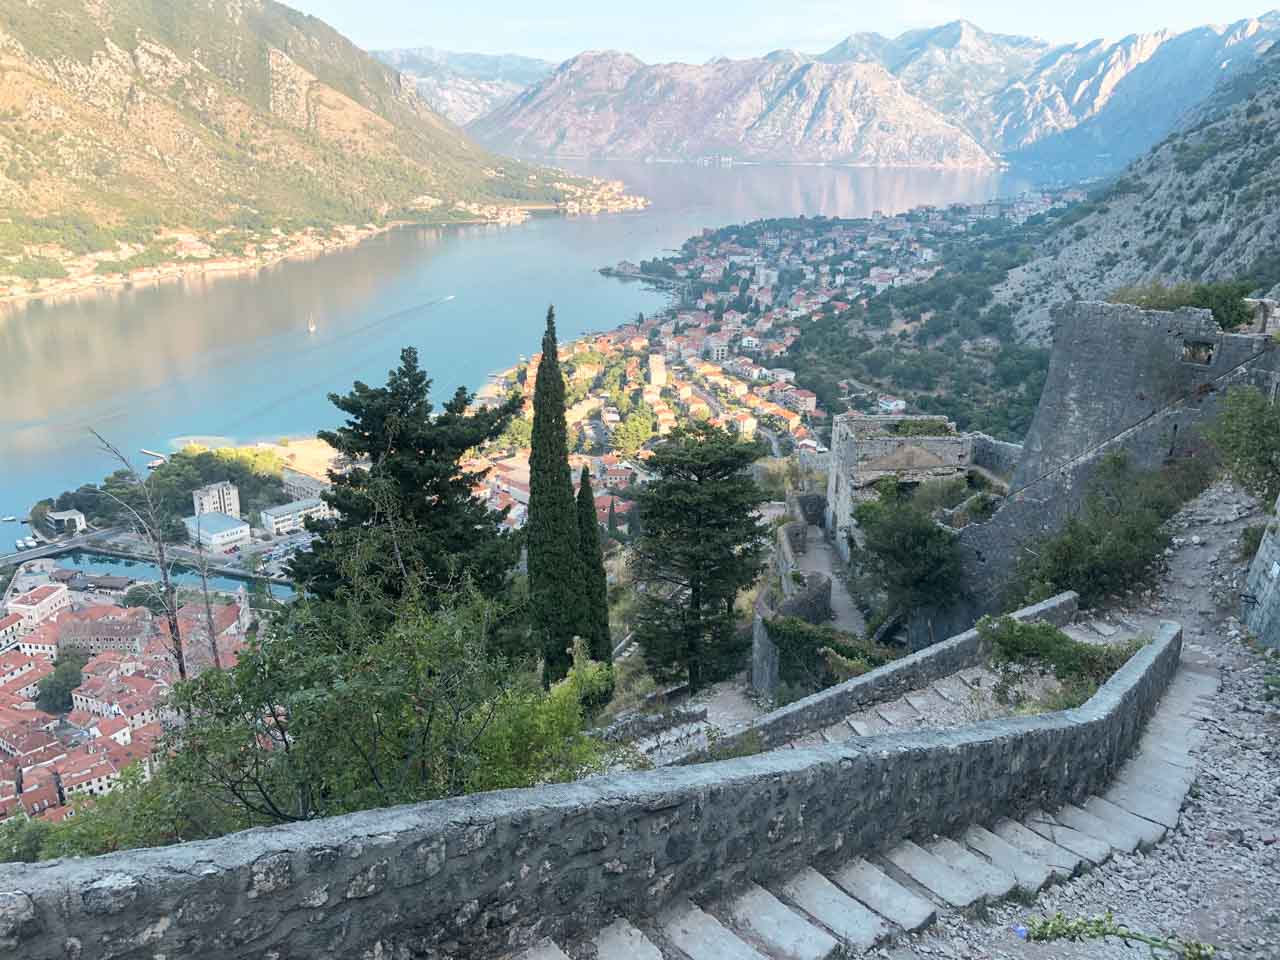 Kotor Bay seen from the top of the Kotor City Walls